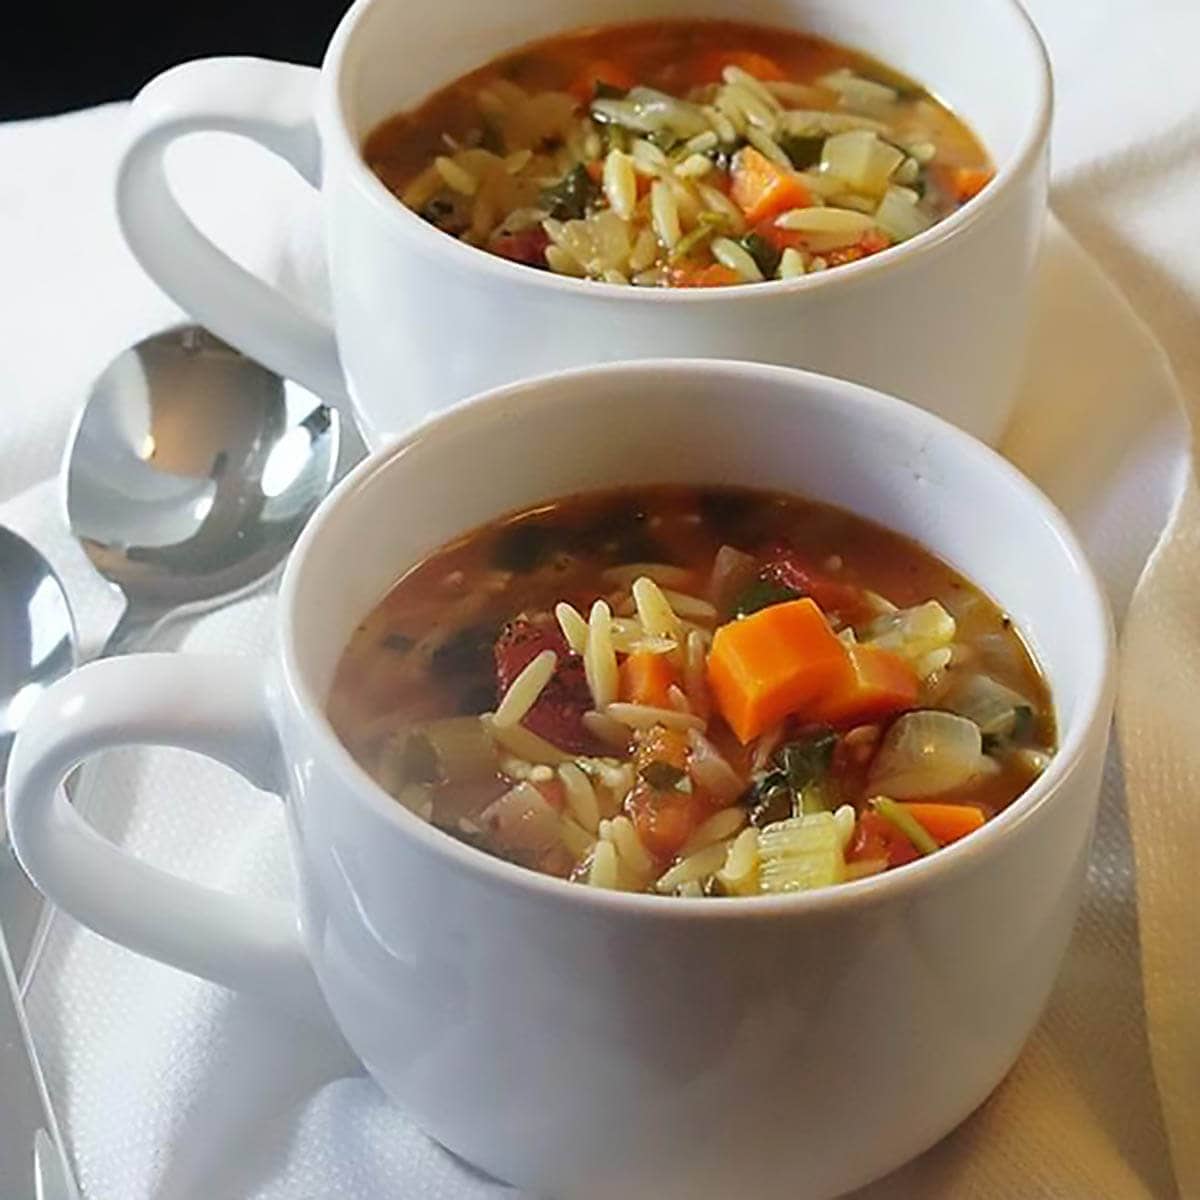 Vegetable Orzo Soup in white bowls with serving spoons.